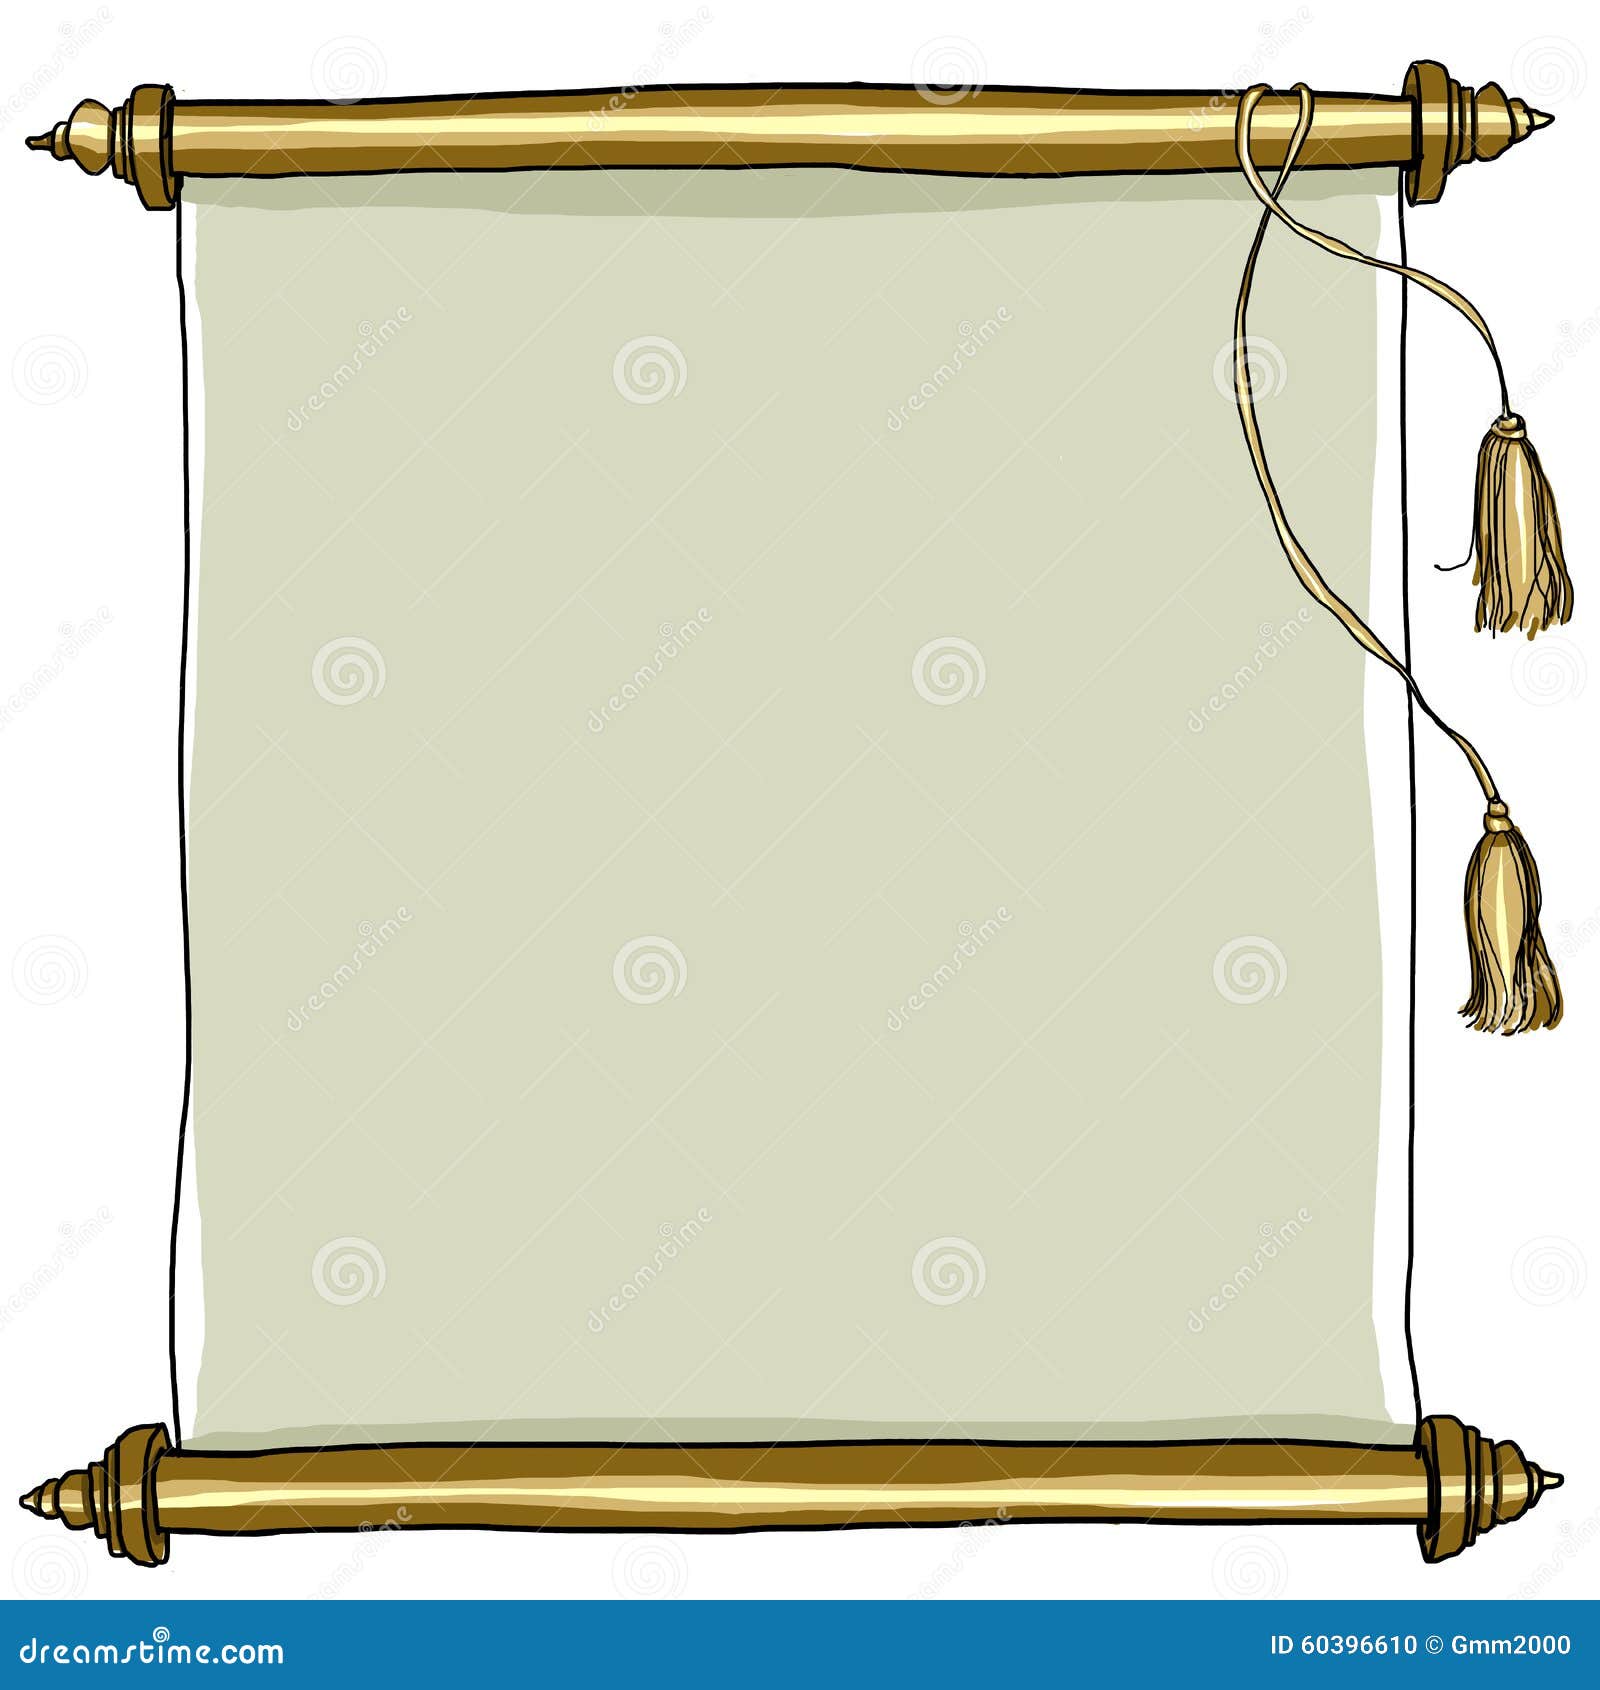 buy scroll clipart - photo #16